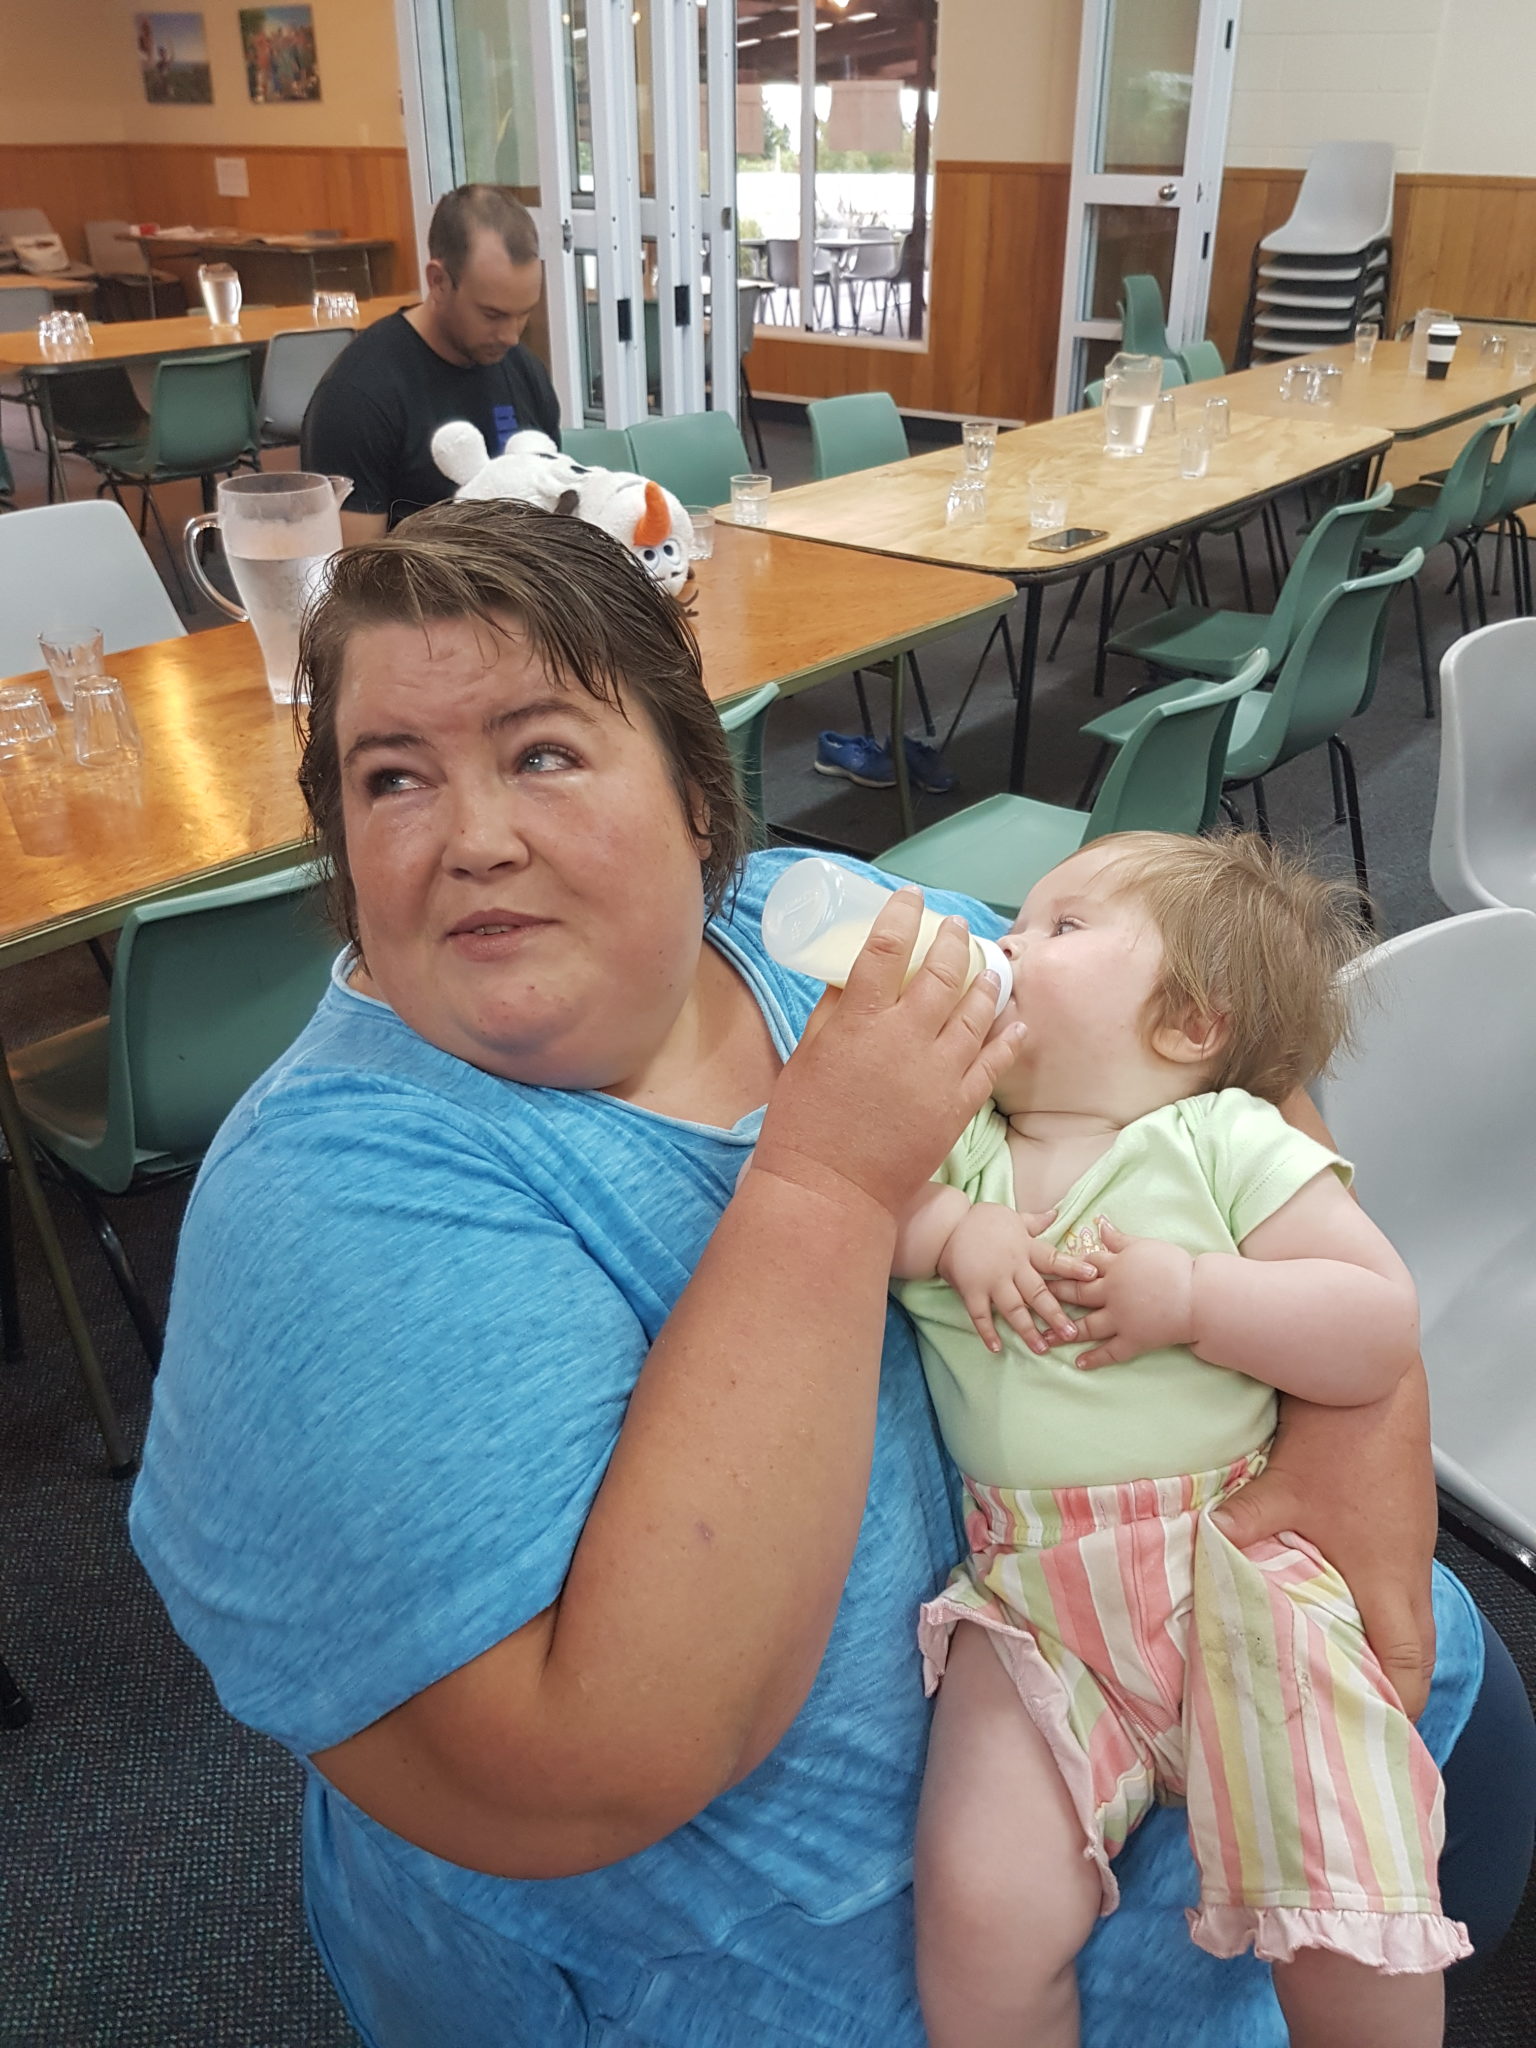 Youngest camp attendee being well looked after, Taupo 2020